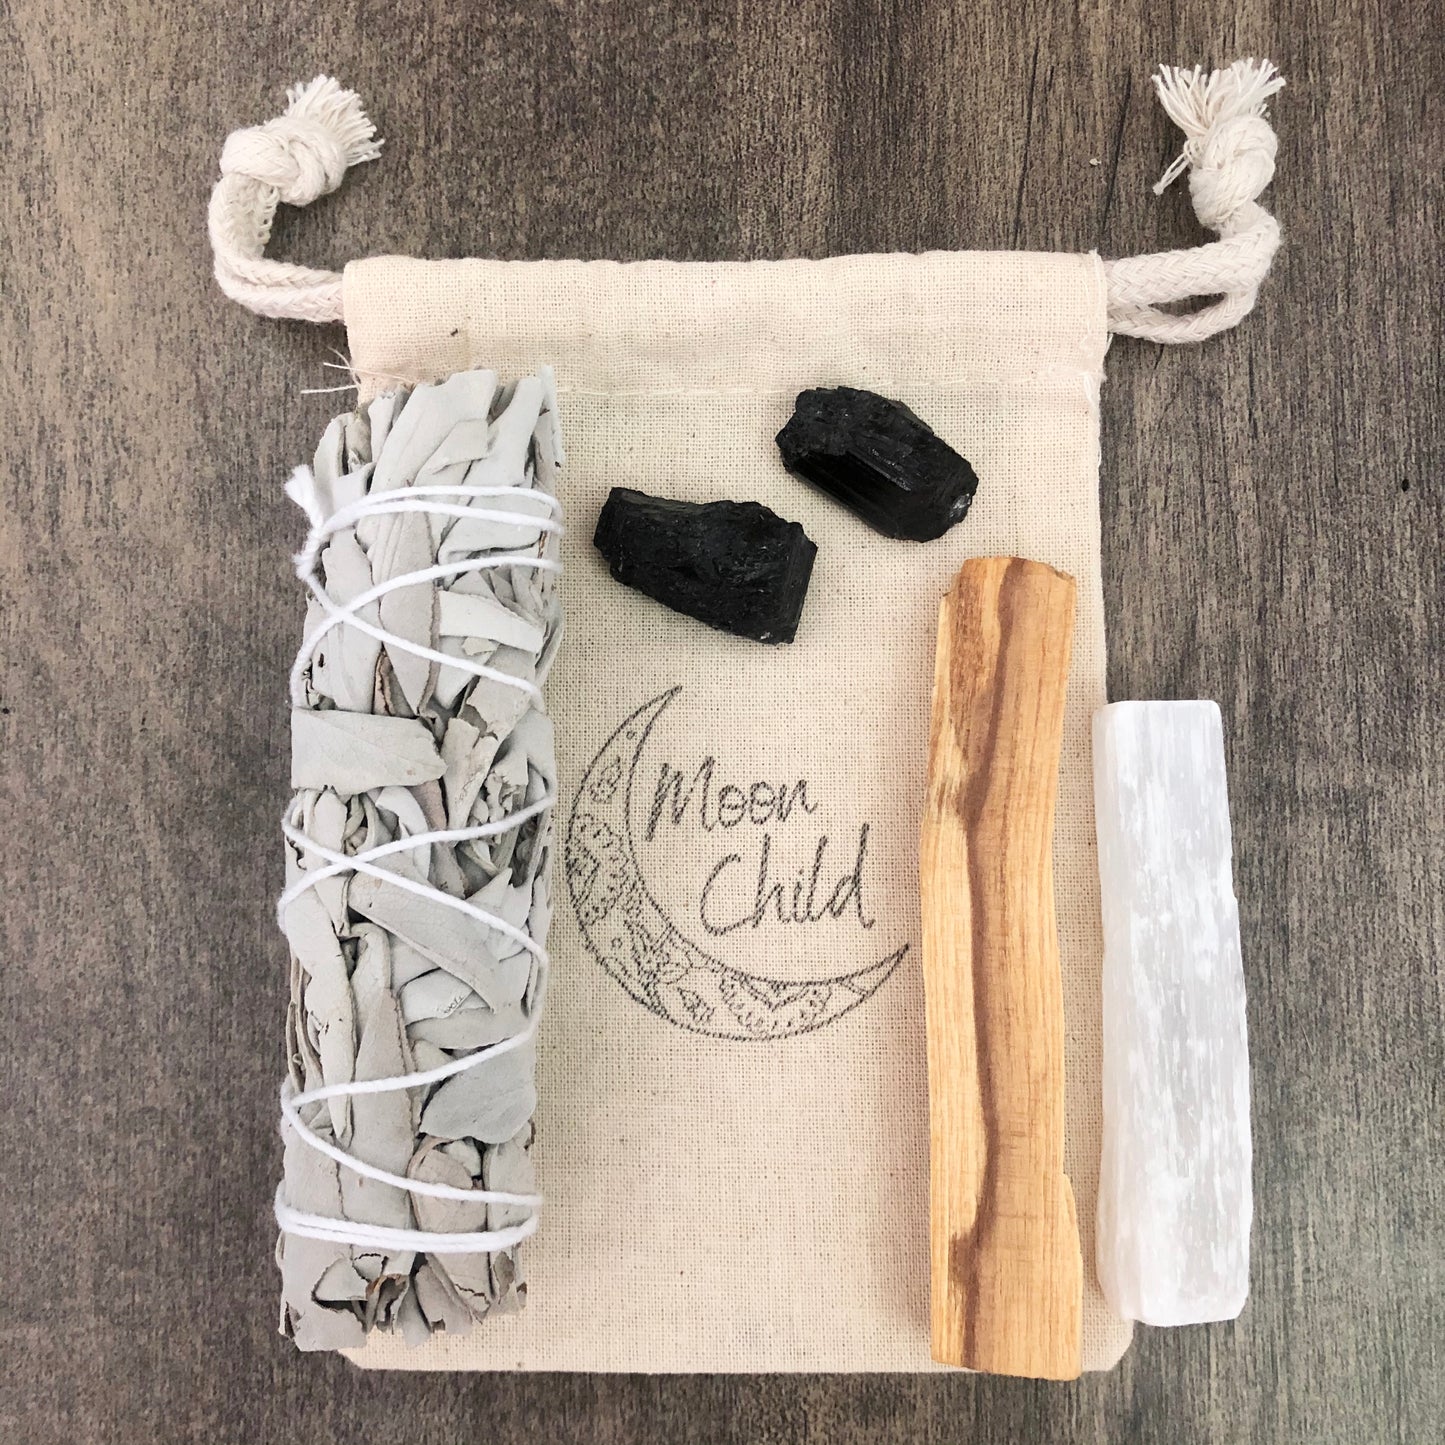 Purification & Protection Smudging & Clearing Kit